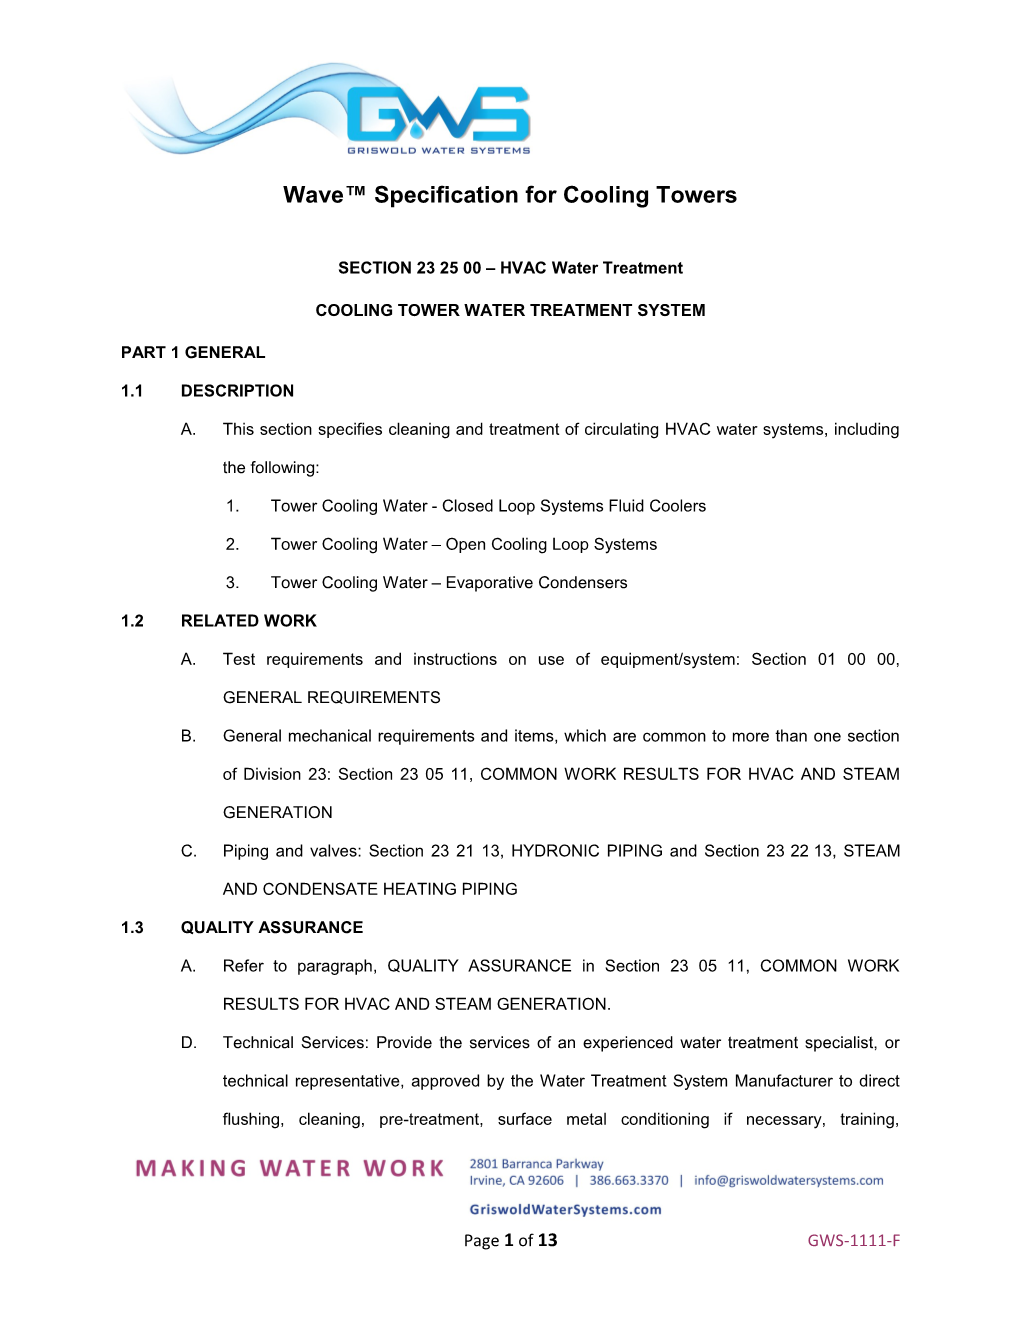 Wave Specification for Cooling Towers